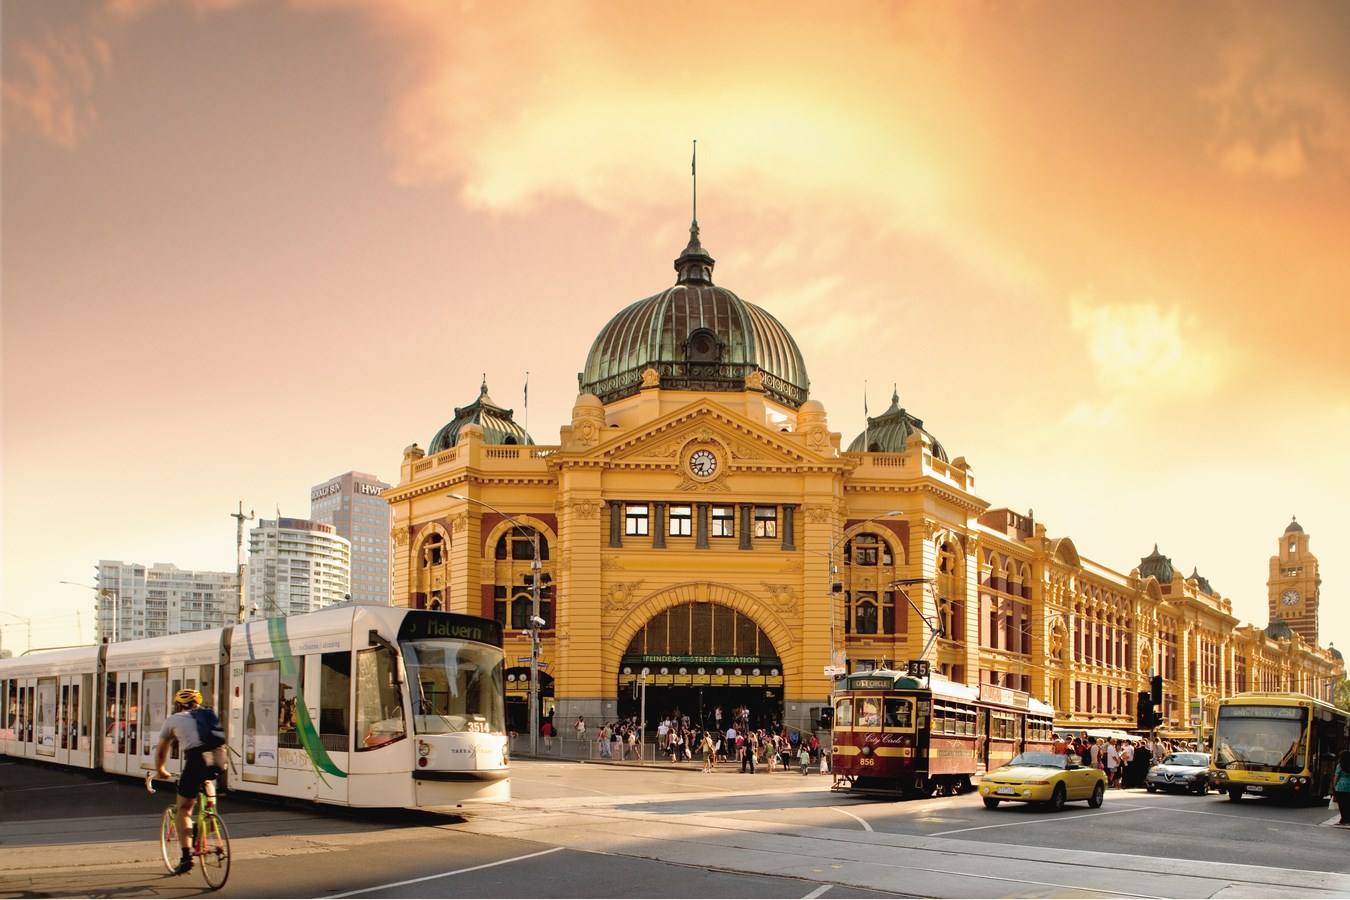 25 Iconic Projects by Herzog & de Meuron every Architect Should Know - FLINDERS STREET STATION, MELBOURNE, AUSTRALIA - Sheet2